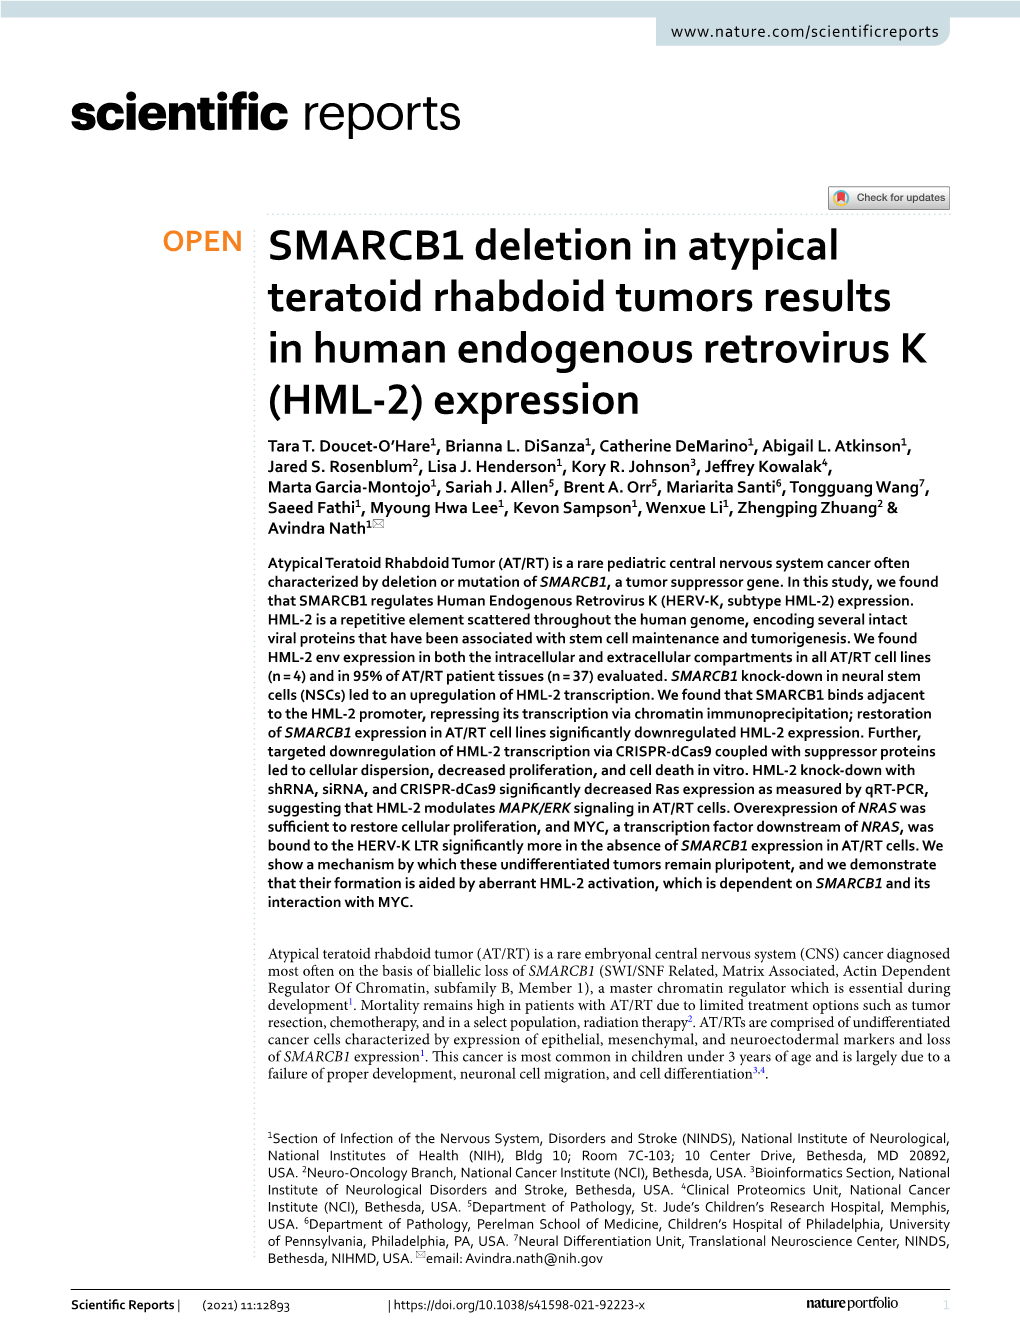 SMARCB1 Deletion in Atypical Teratoid Rhabdoid Tumors Results in Human Endogenous Retrovirus K (HML-2) Expression